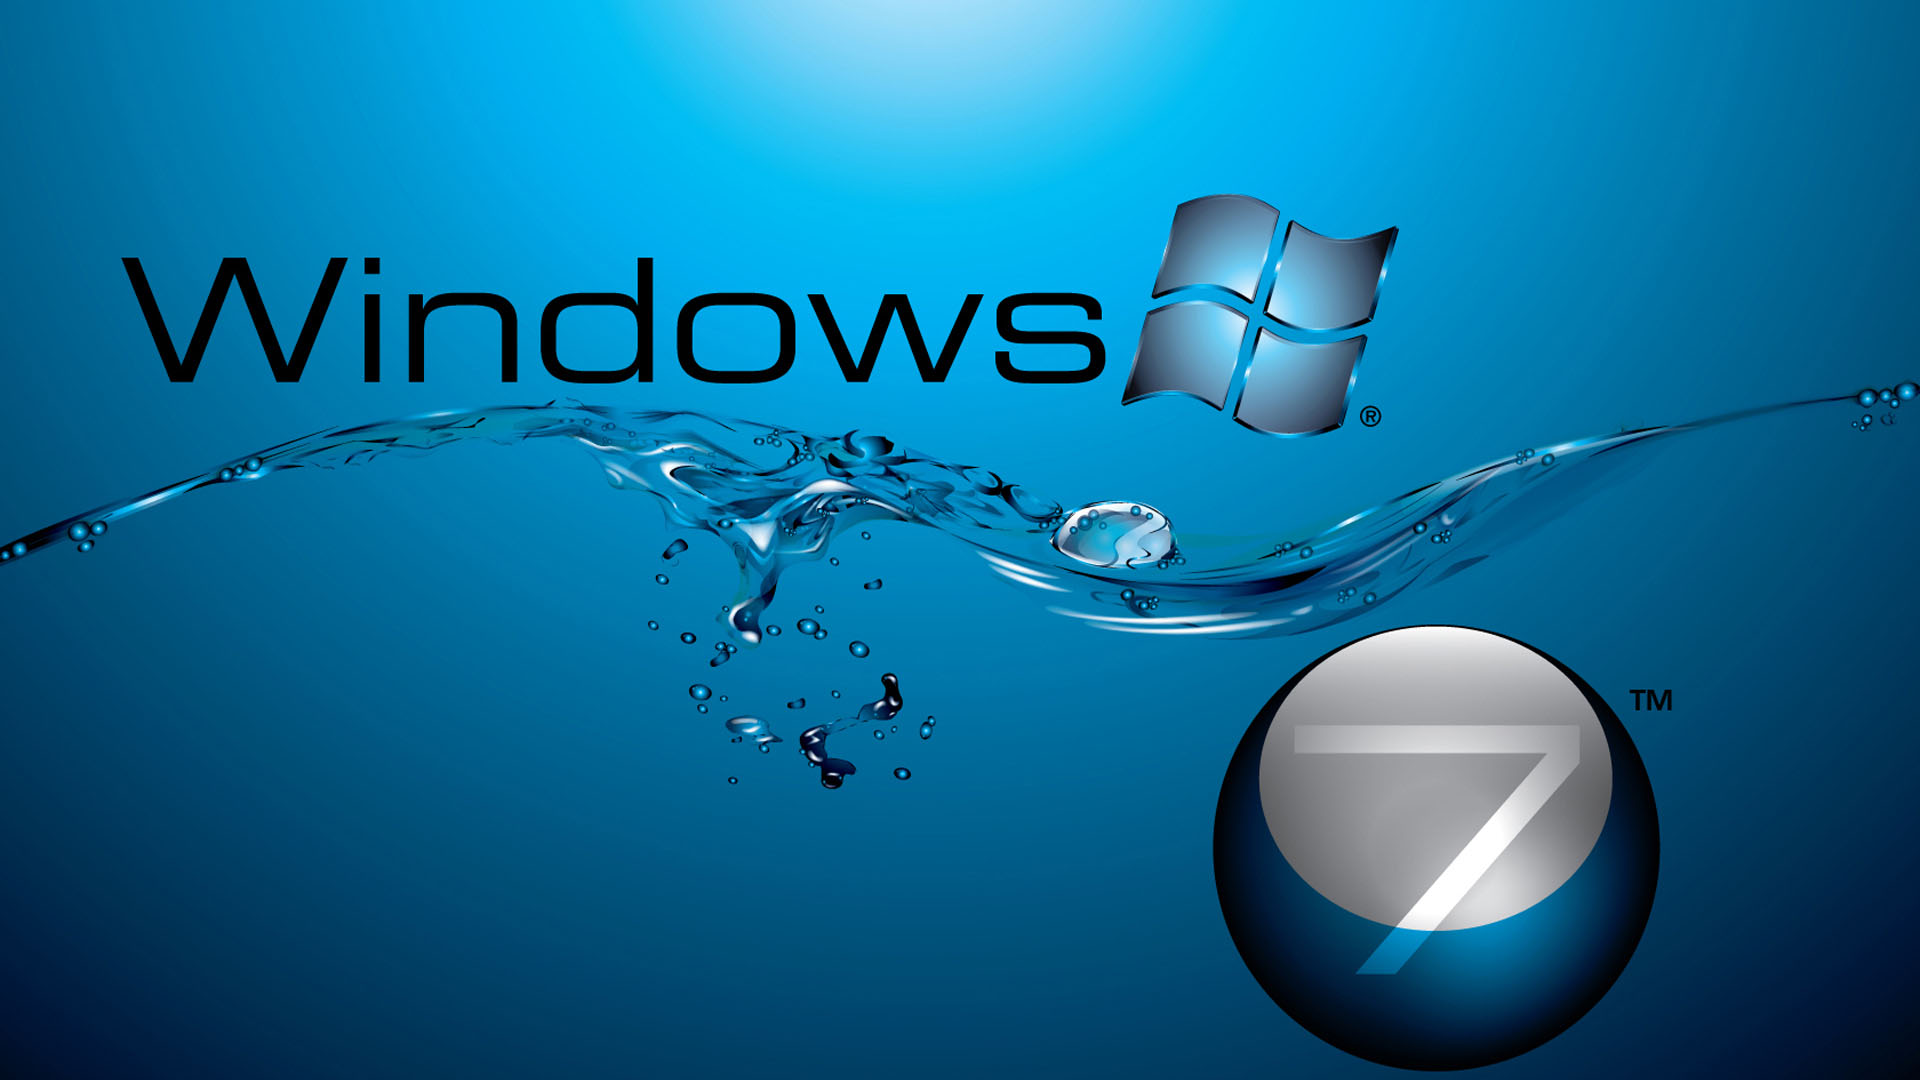 HD Wallpapers for Windows 7 